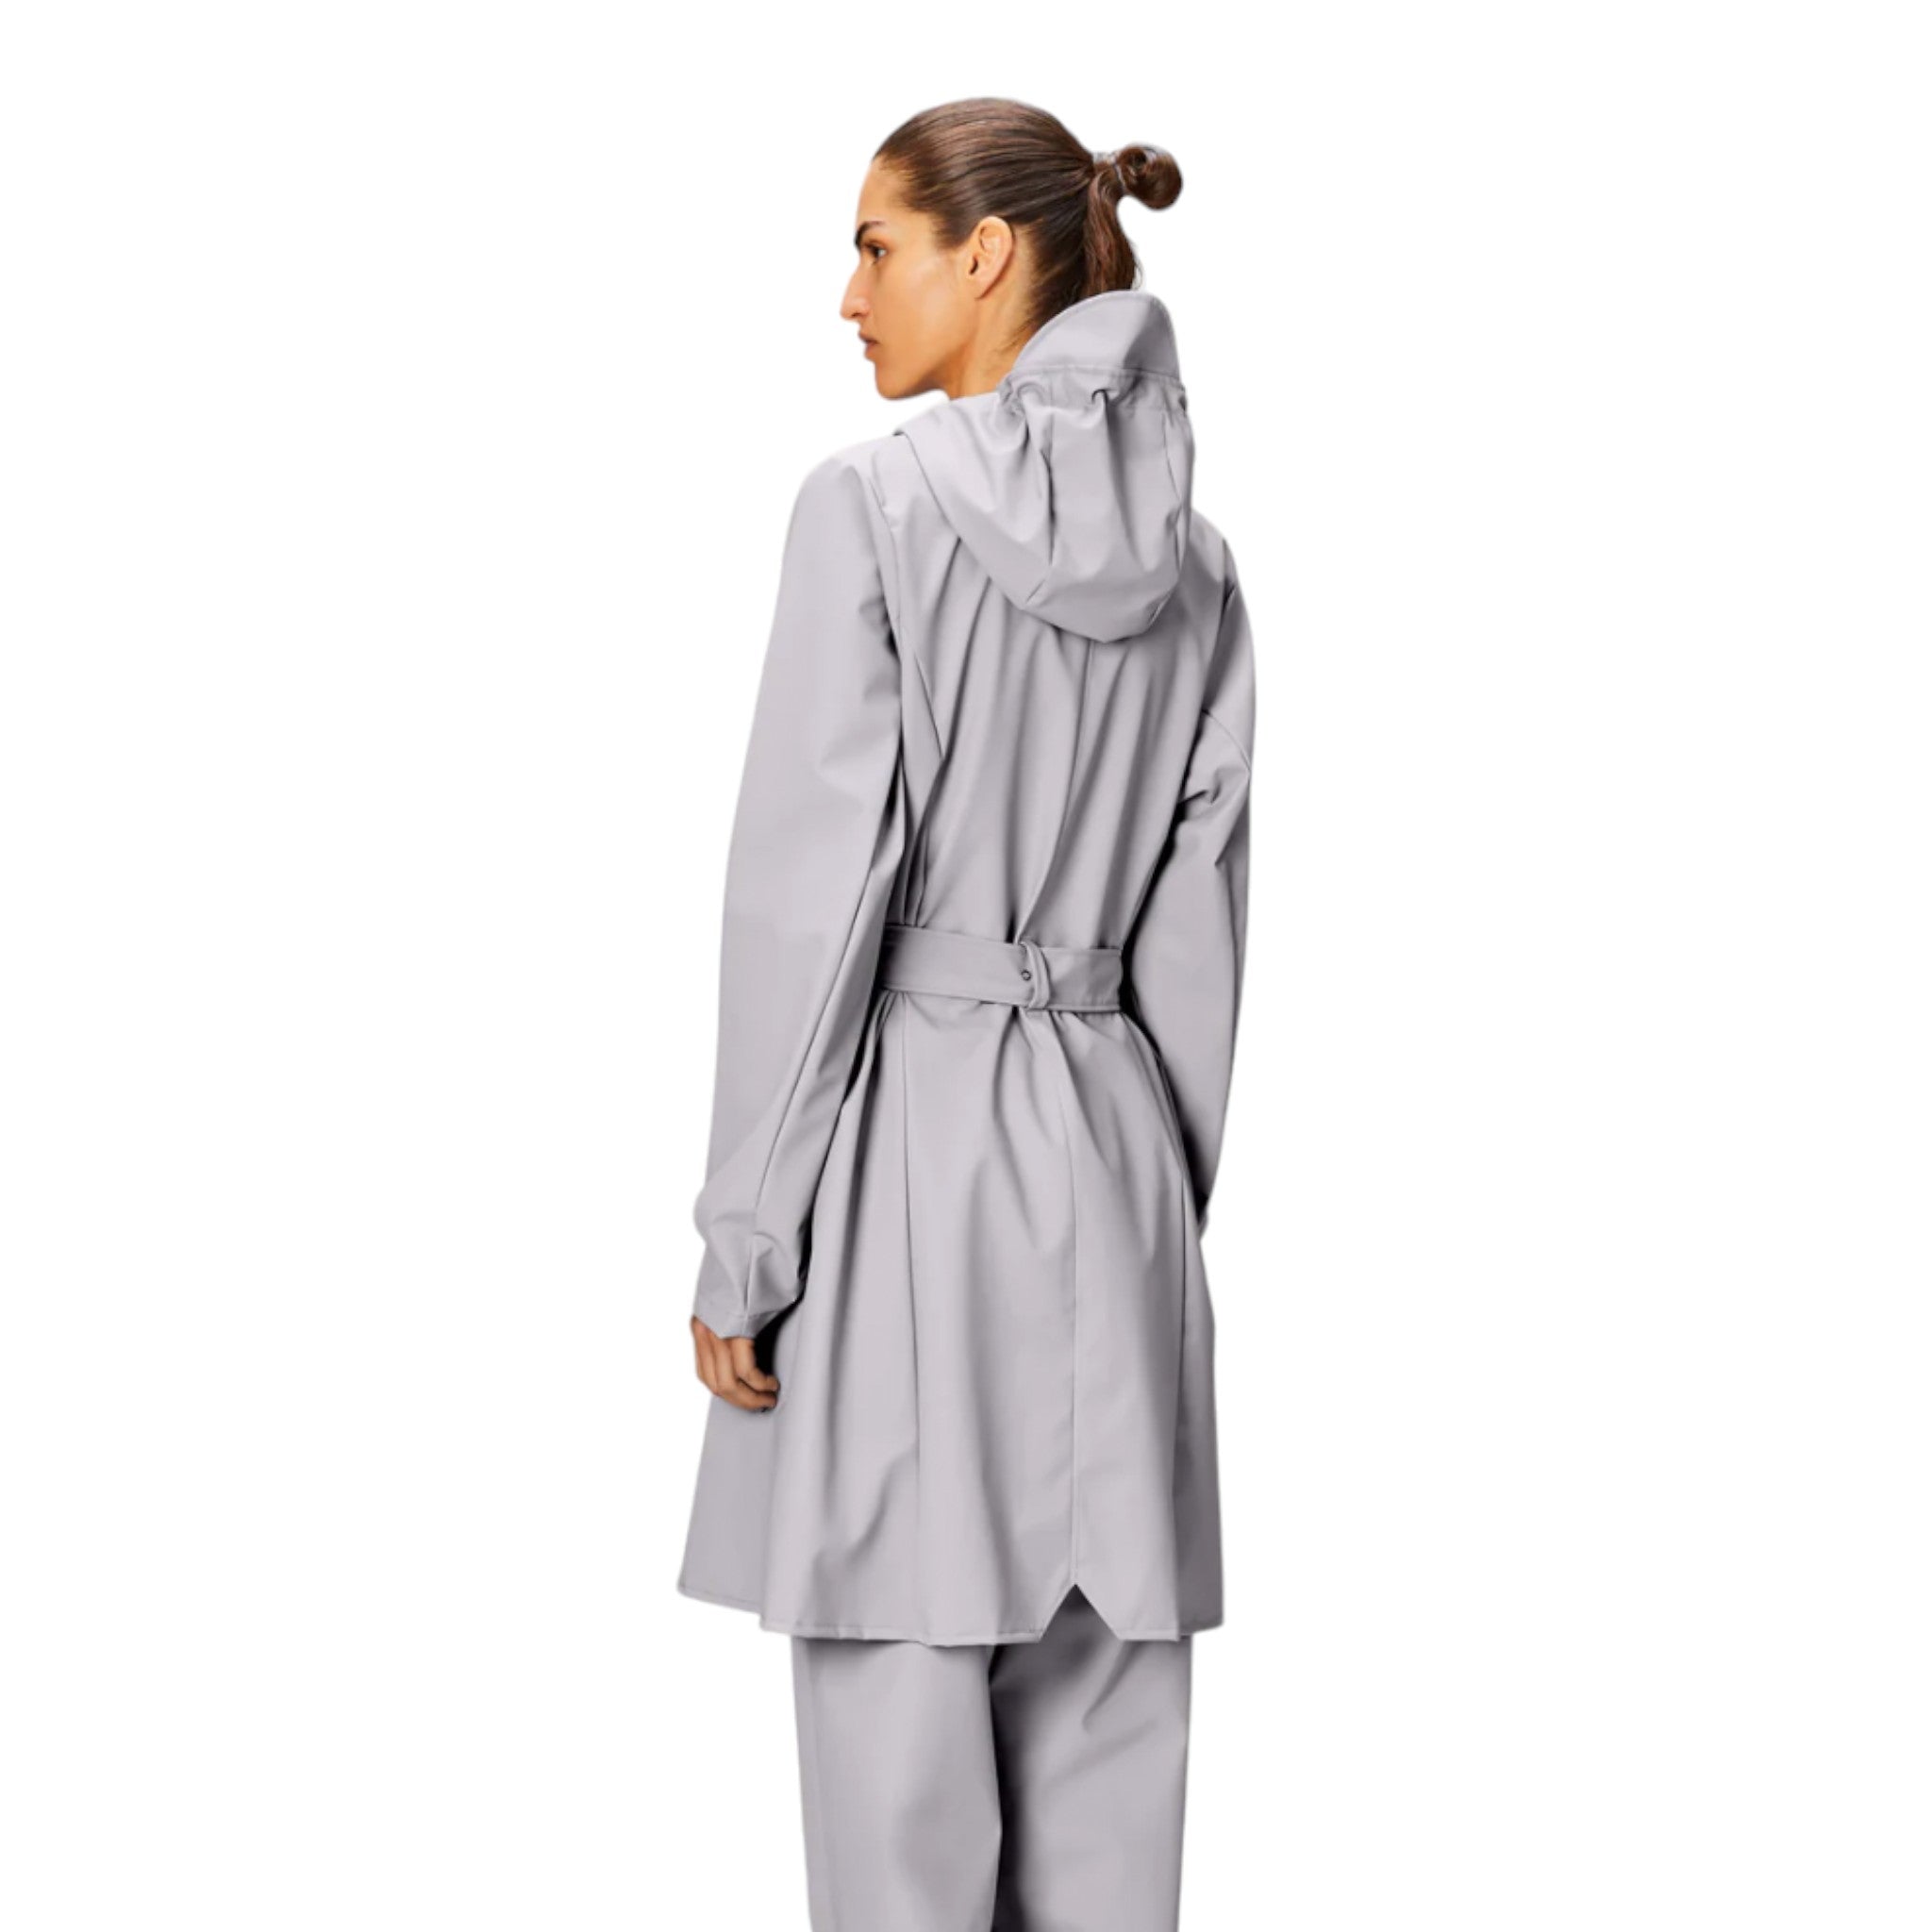 hooded, light grey trench coat style rain coat with waist tie and 2 snap closure pockets on the front